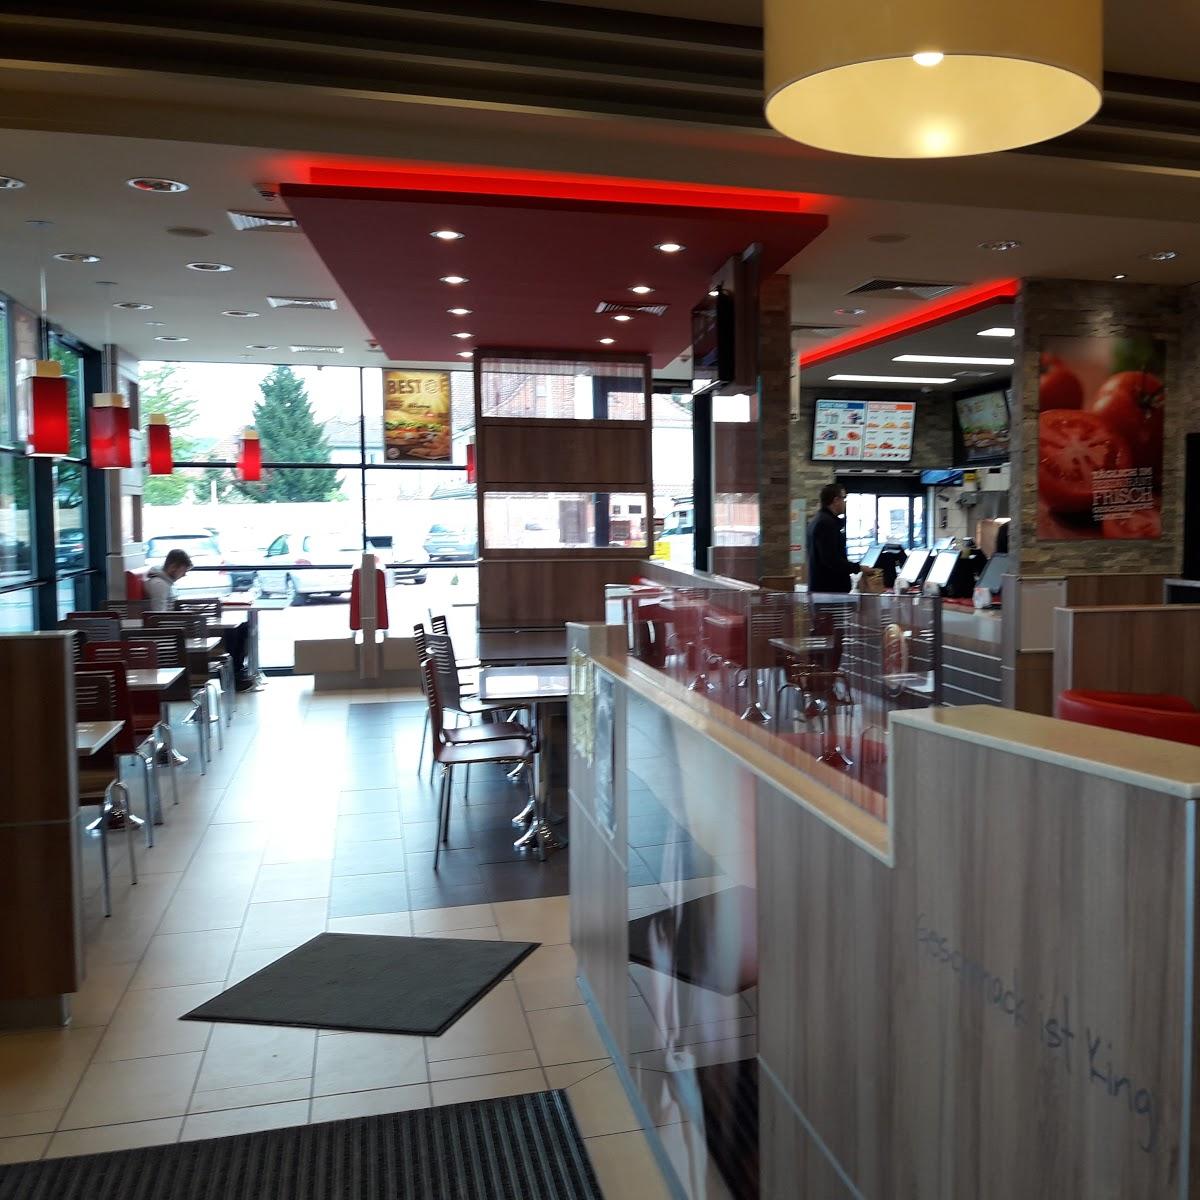 Restaurant "BURGER KING" in Mosbach